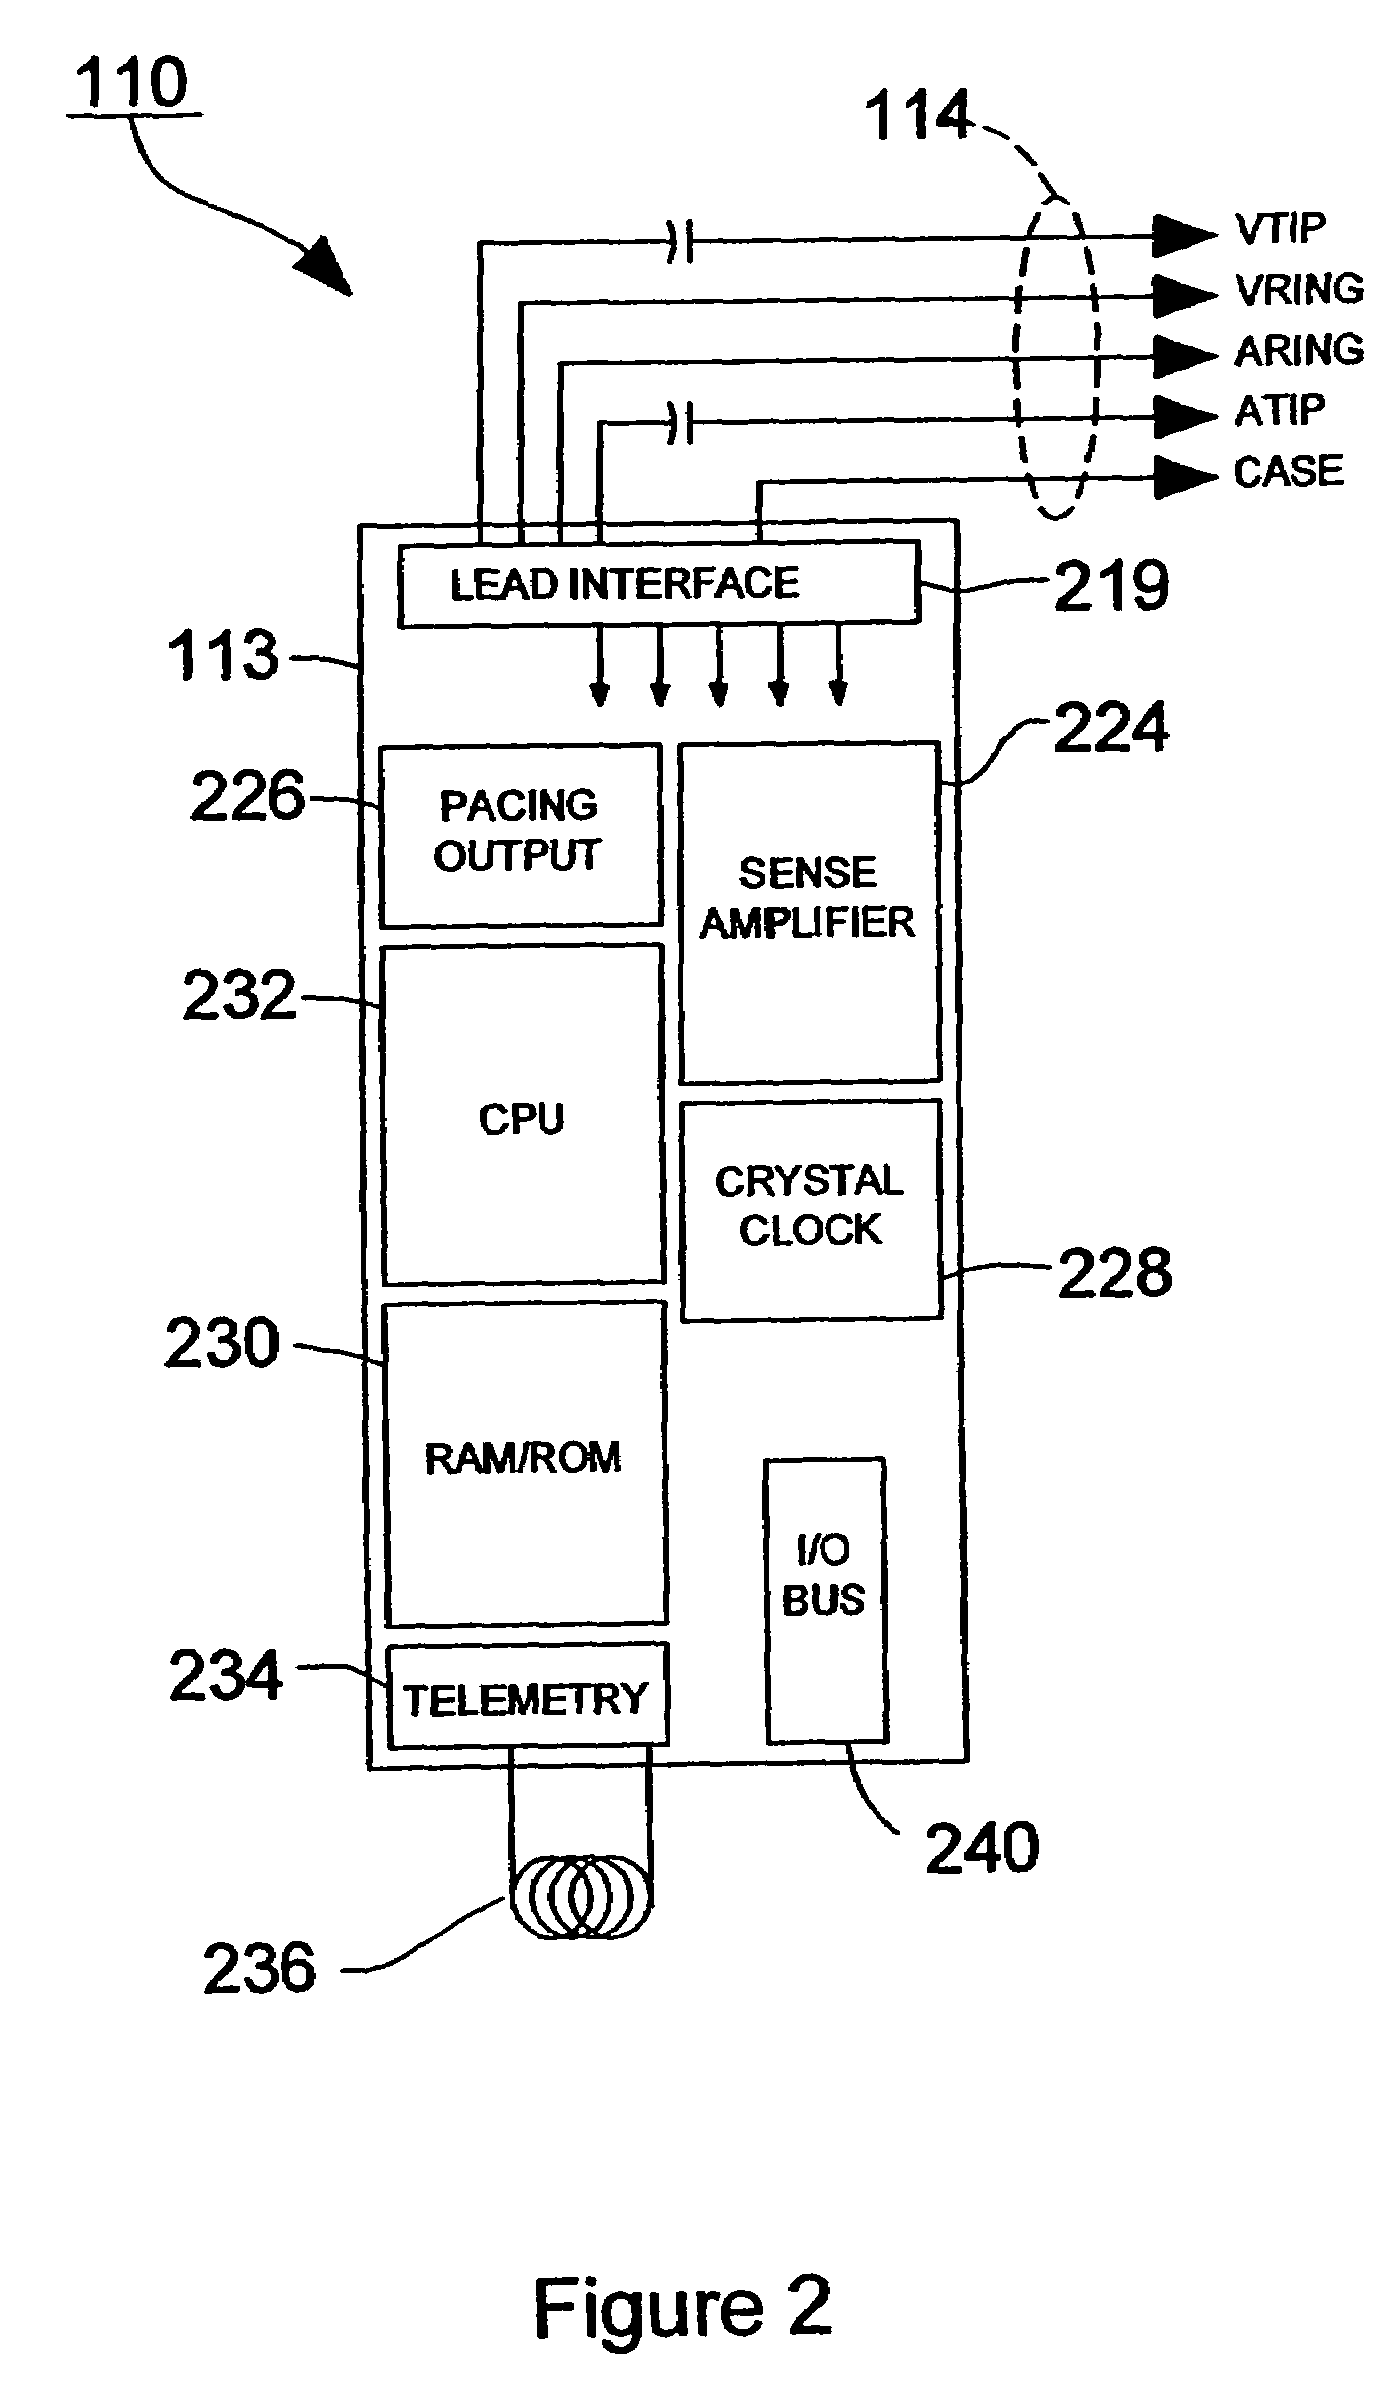 Device for sensing cardiac activity in an implantable medical device in the presence of magnetic resonance imaging interference